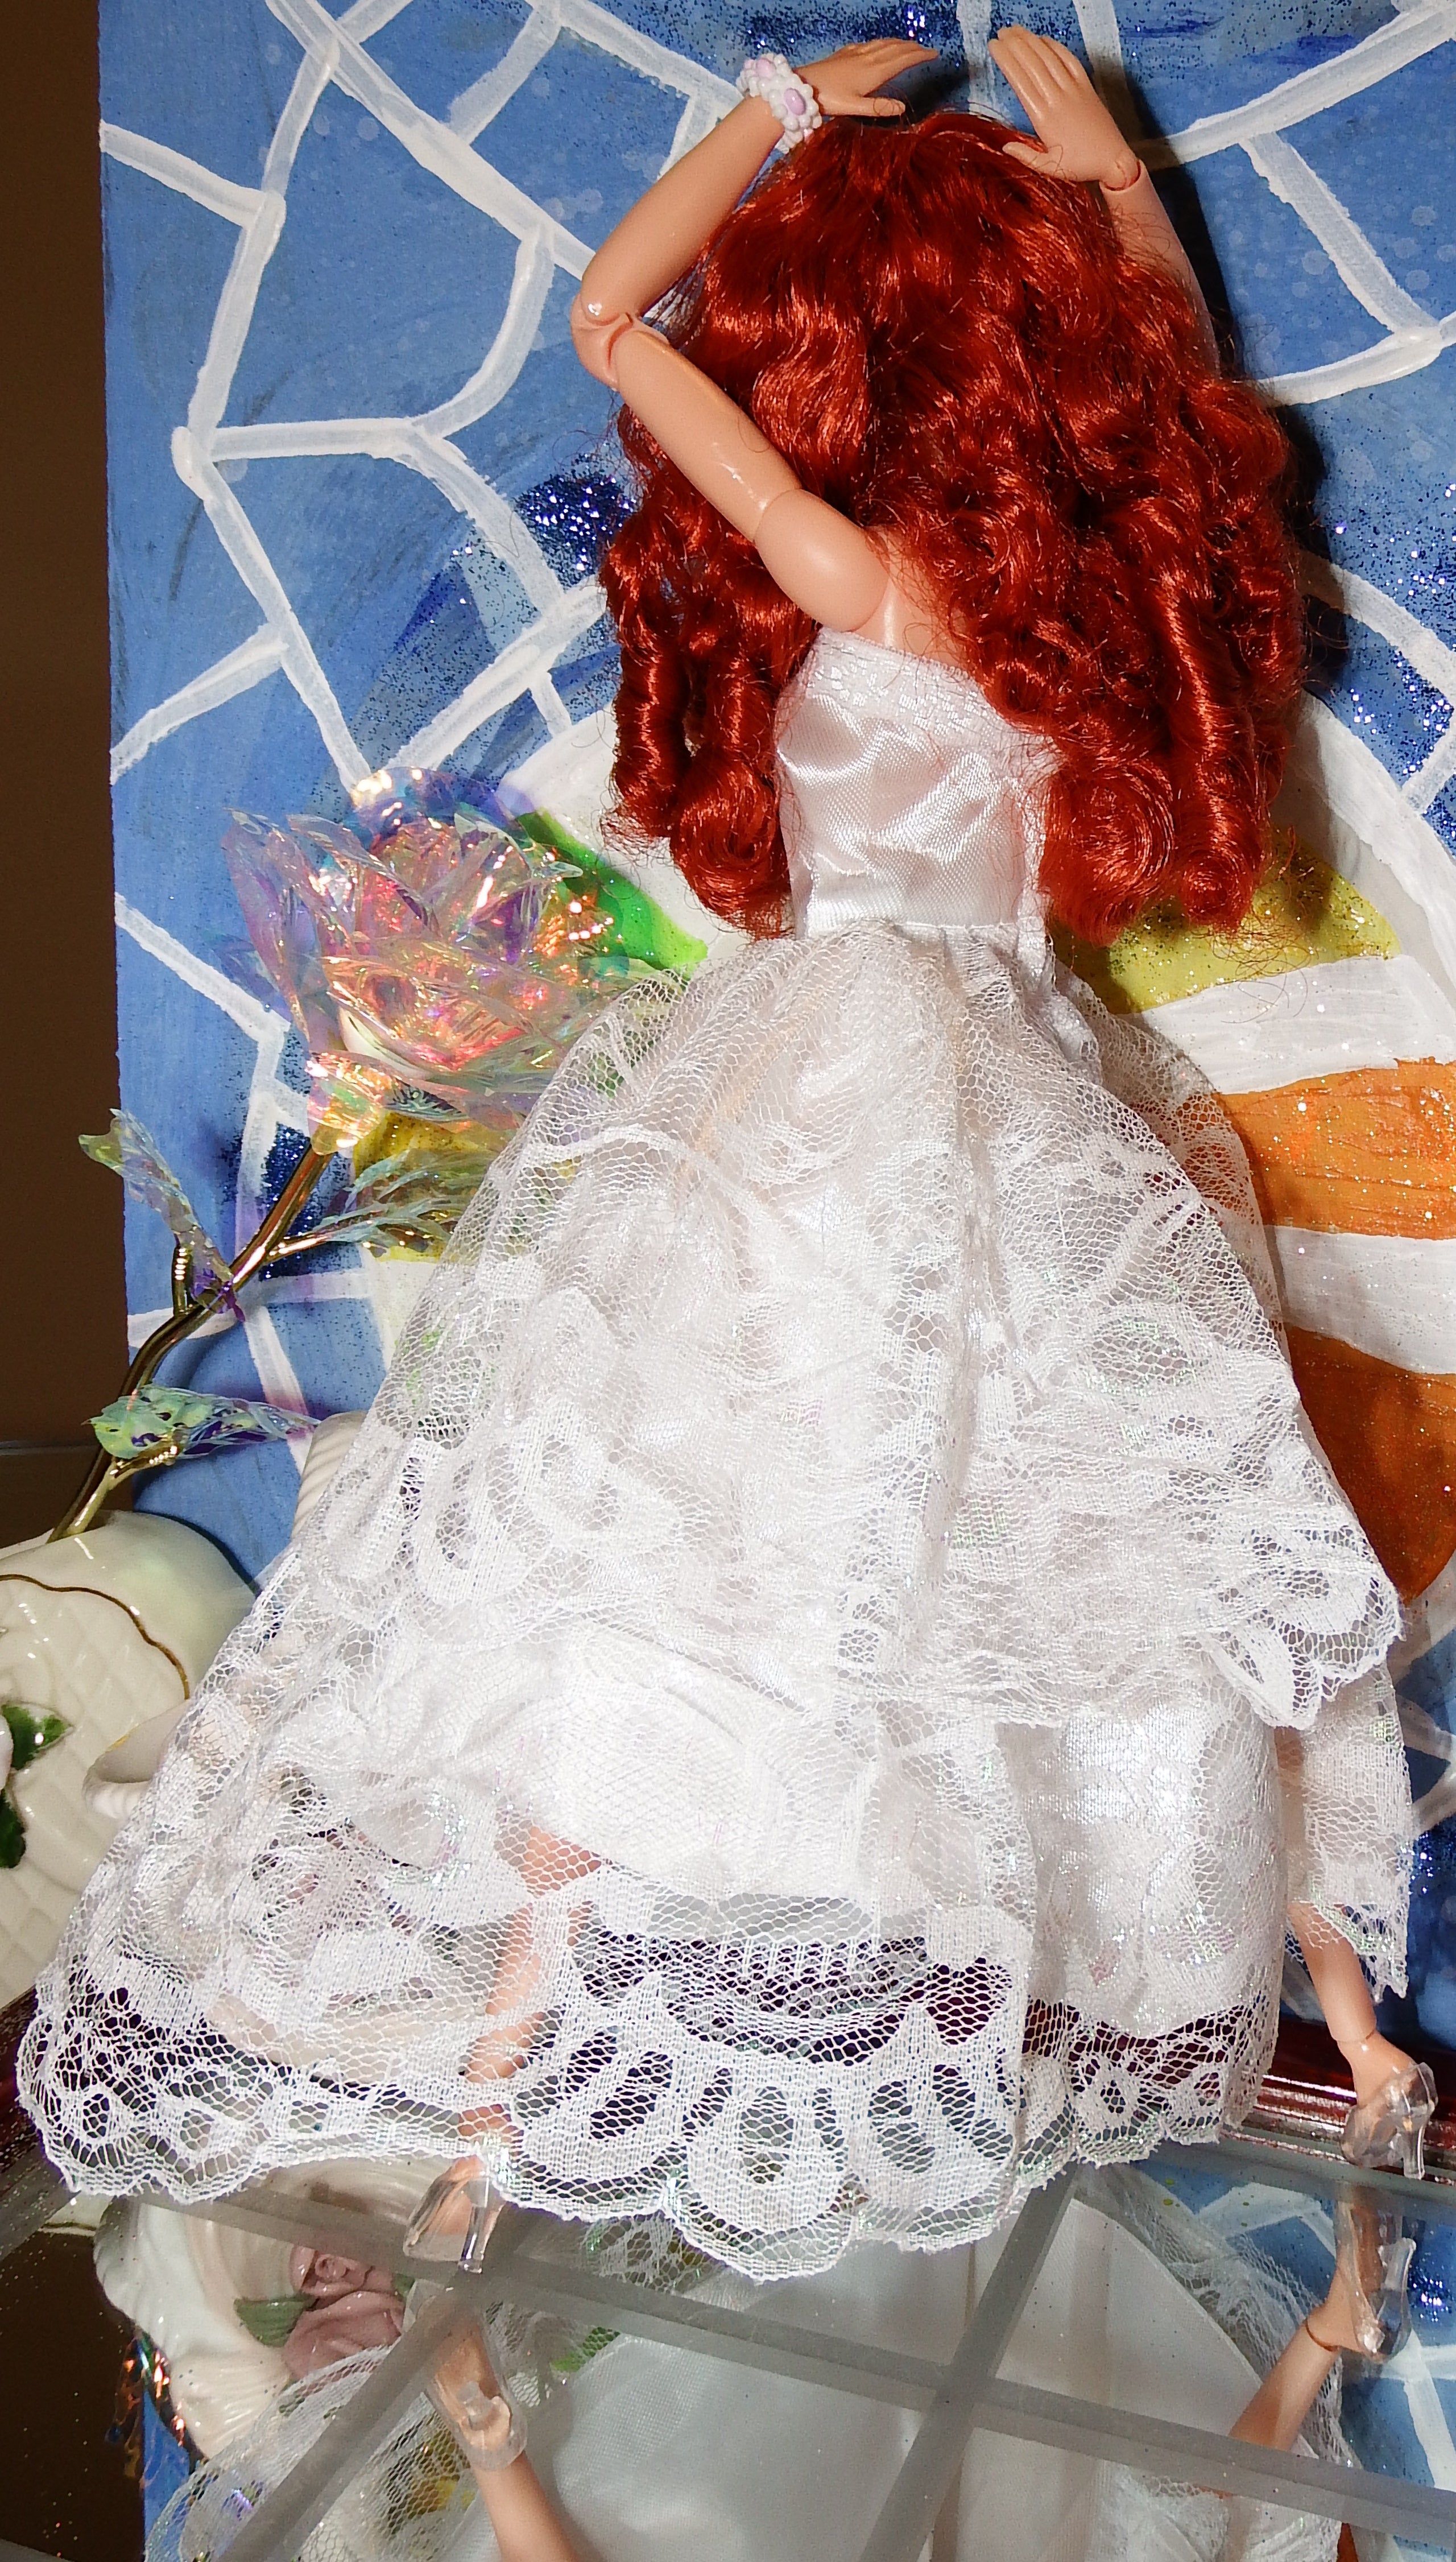 artsy sister Red Headed Barbie in a White Wedding Dress Photoshoot